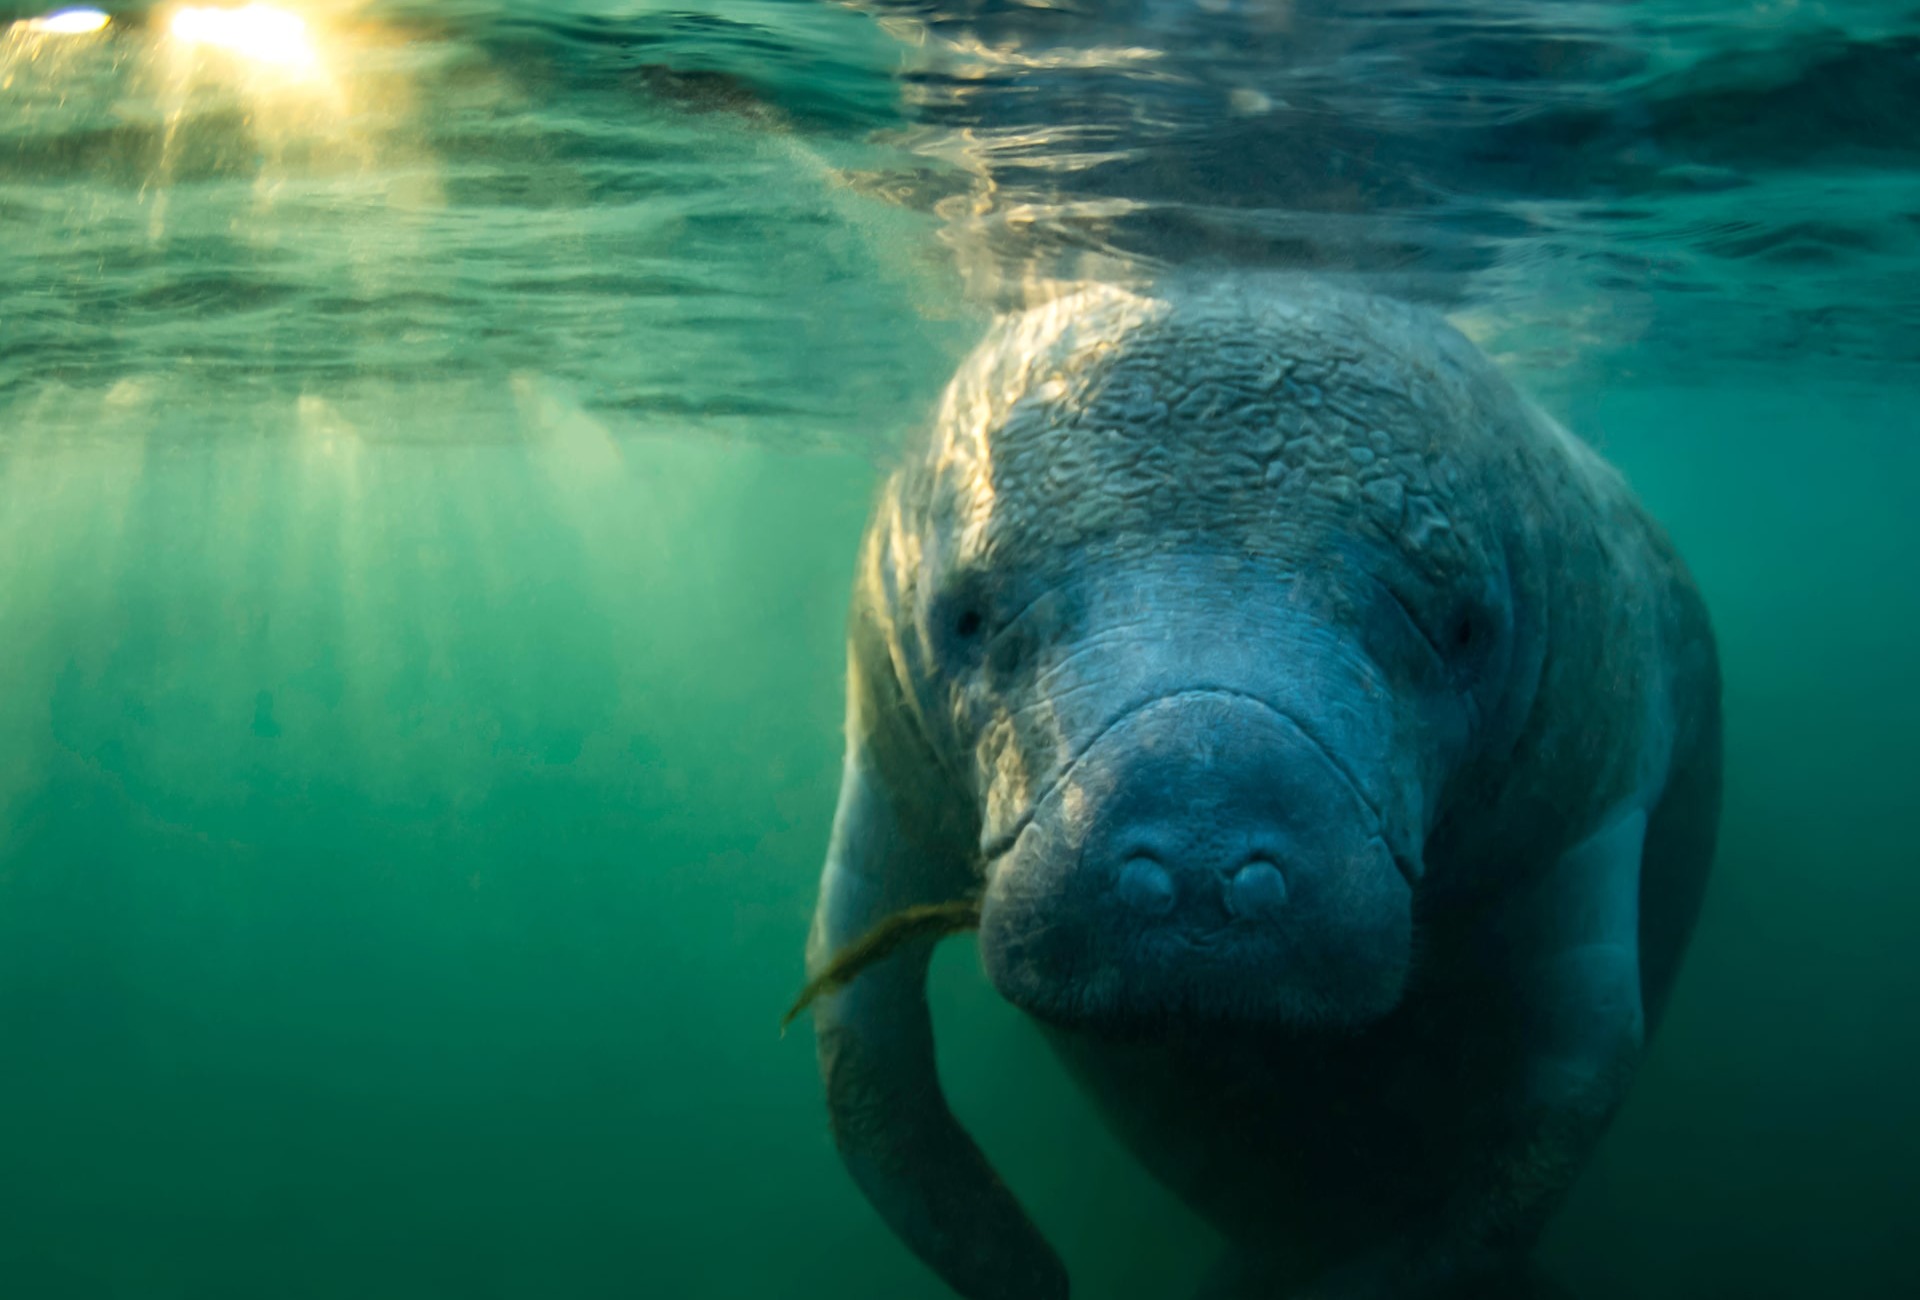 North American or West Indian Manatee, by Eric Carlander